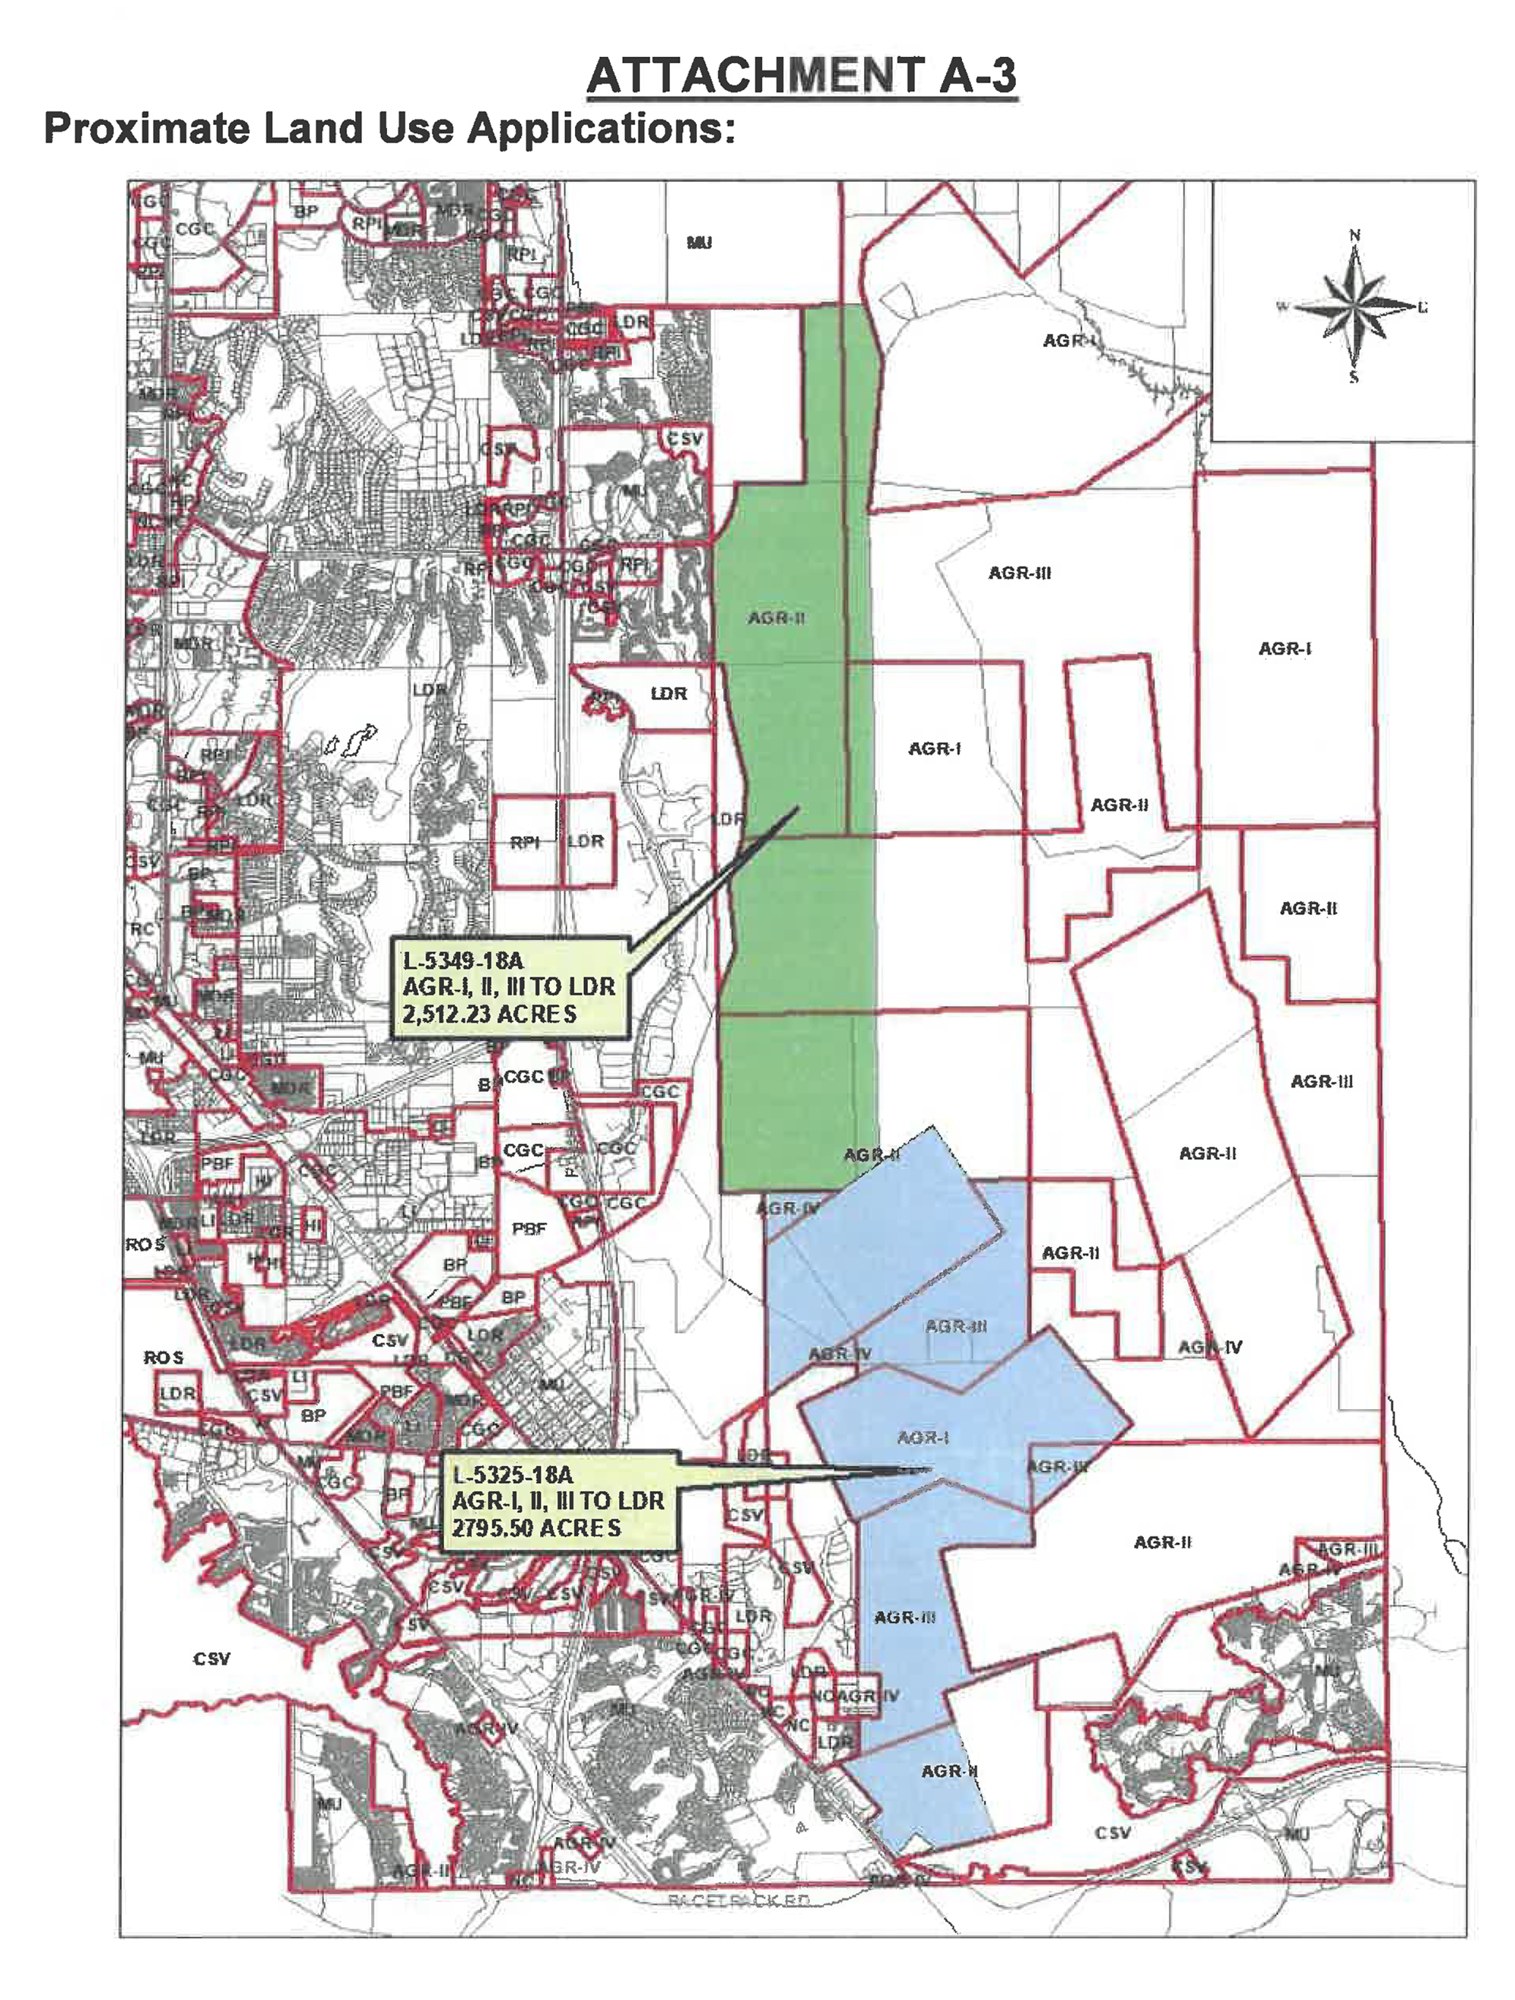 The Davis family is seeking to change the land use of two properties for residential development.